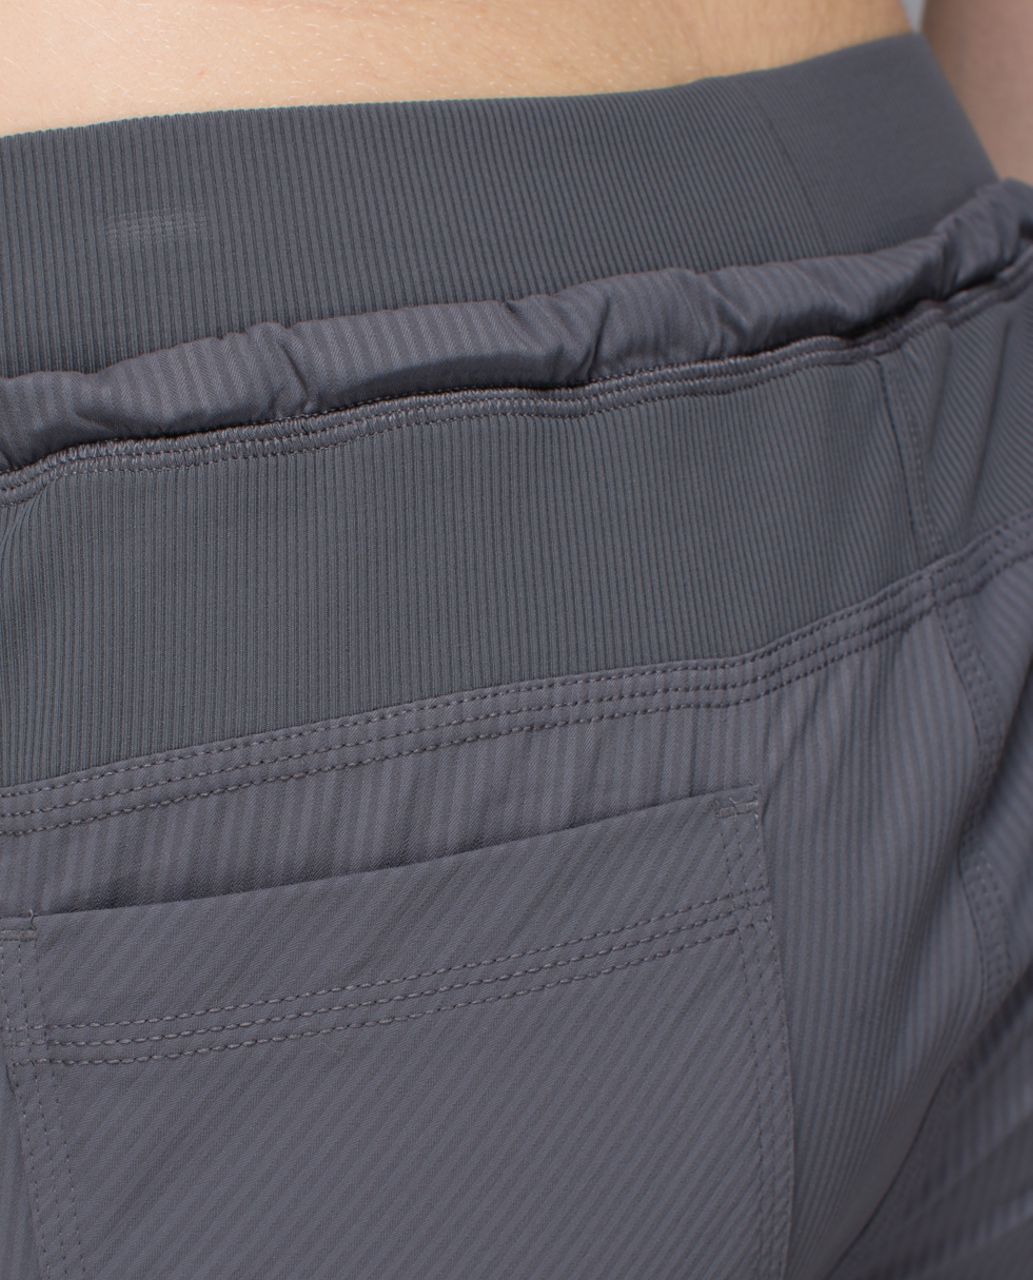 Lululemon Street To Studio Pant Unlined Soot Light Size 4 - $75 - From Zoes